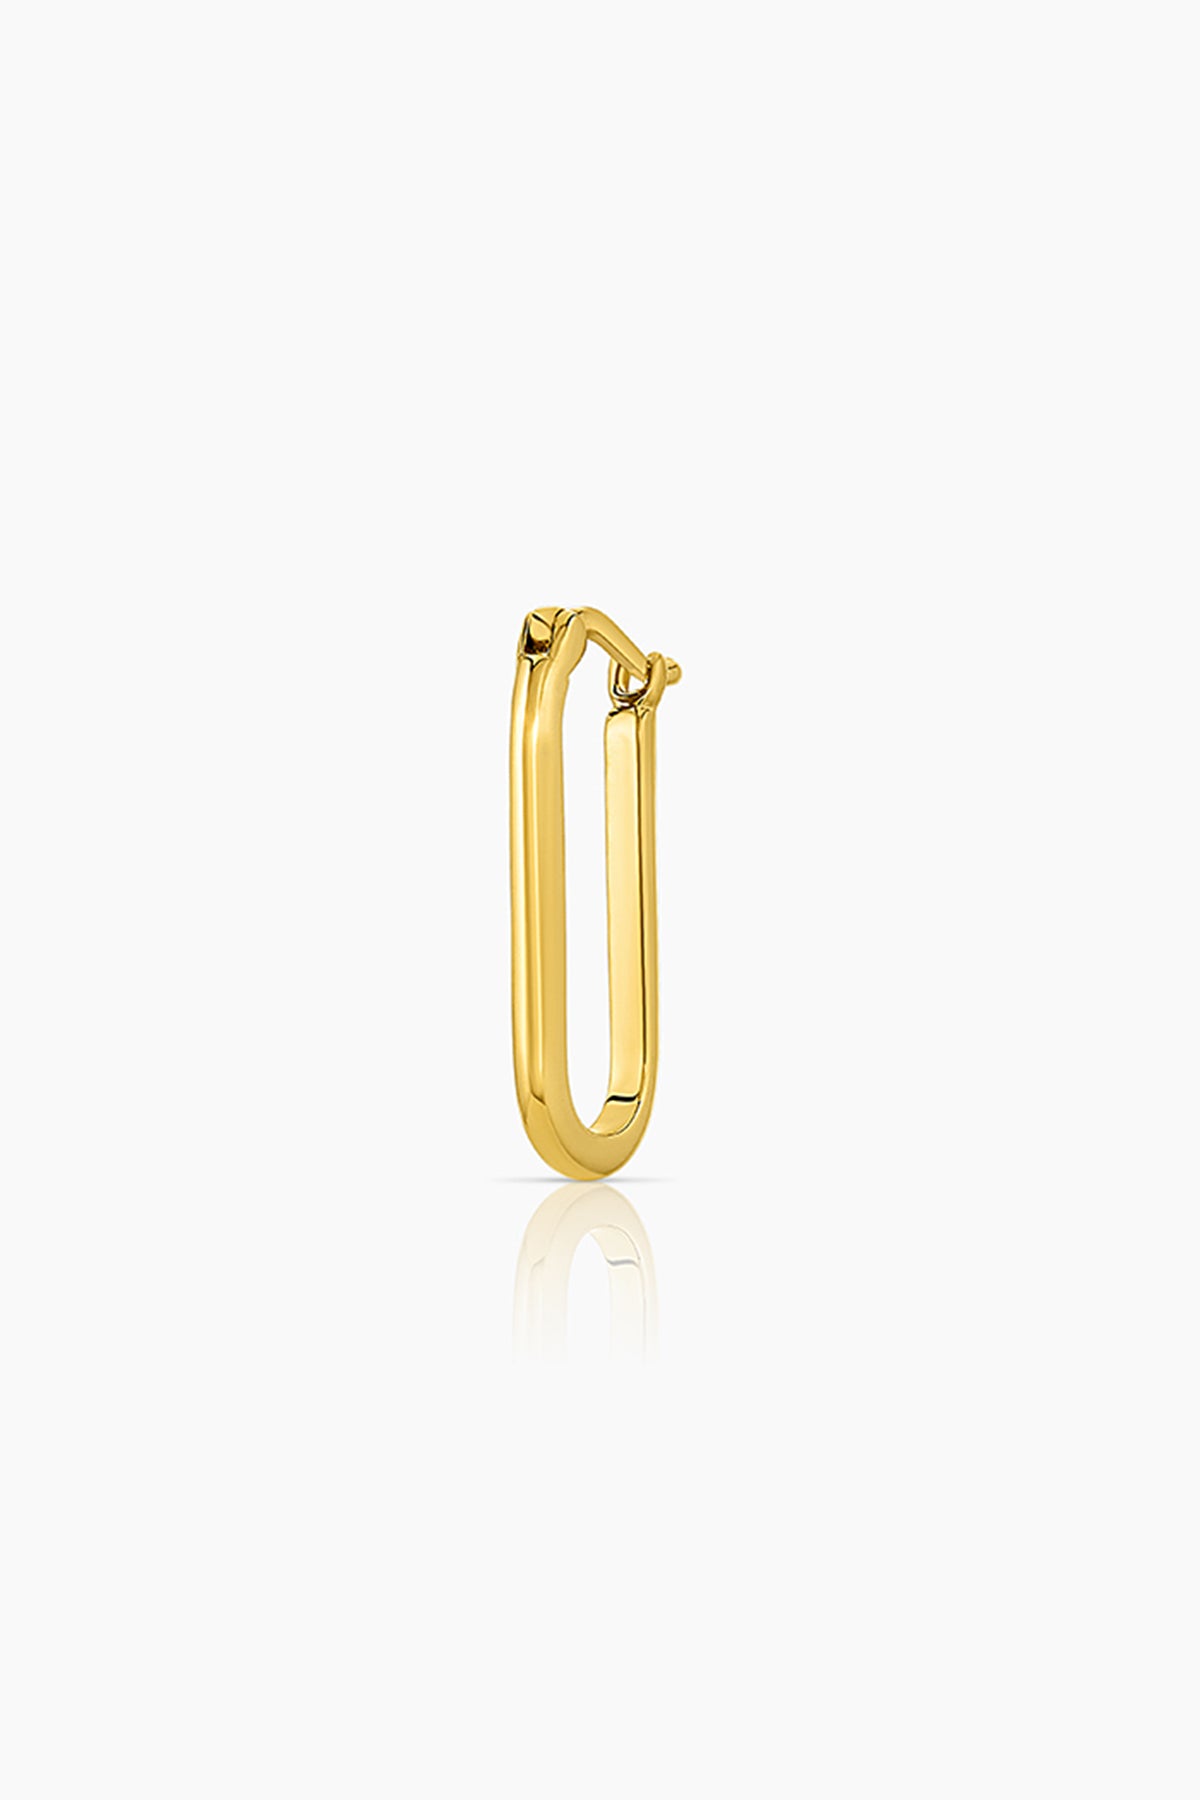 A small yellow gold NADINE ELONGATED HOOPS earring by Thatch.-35526313803969